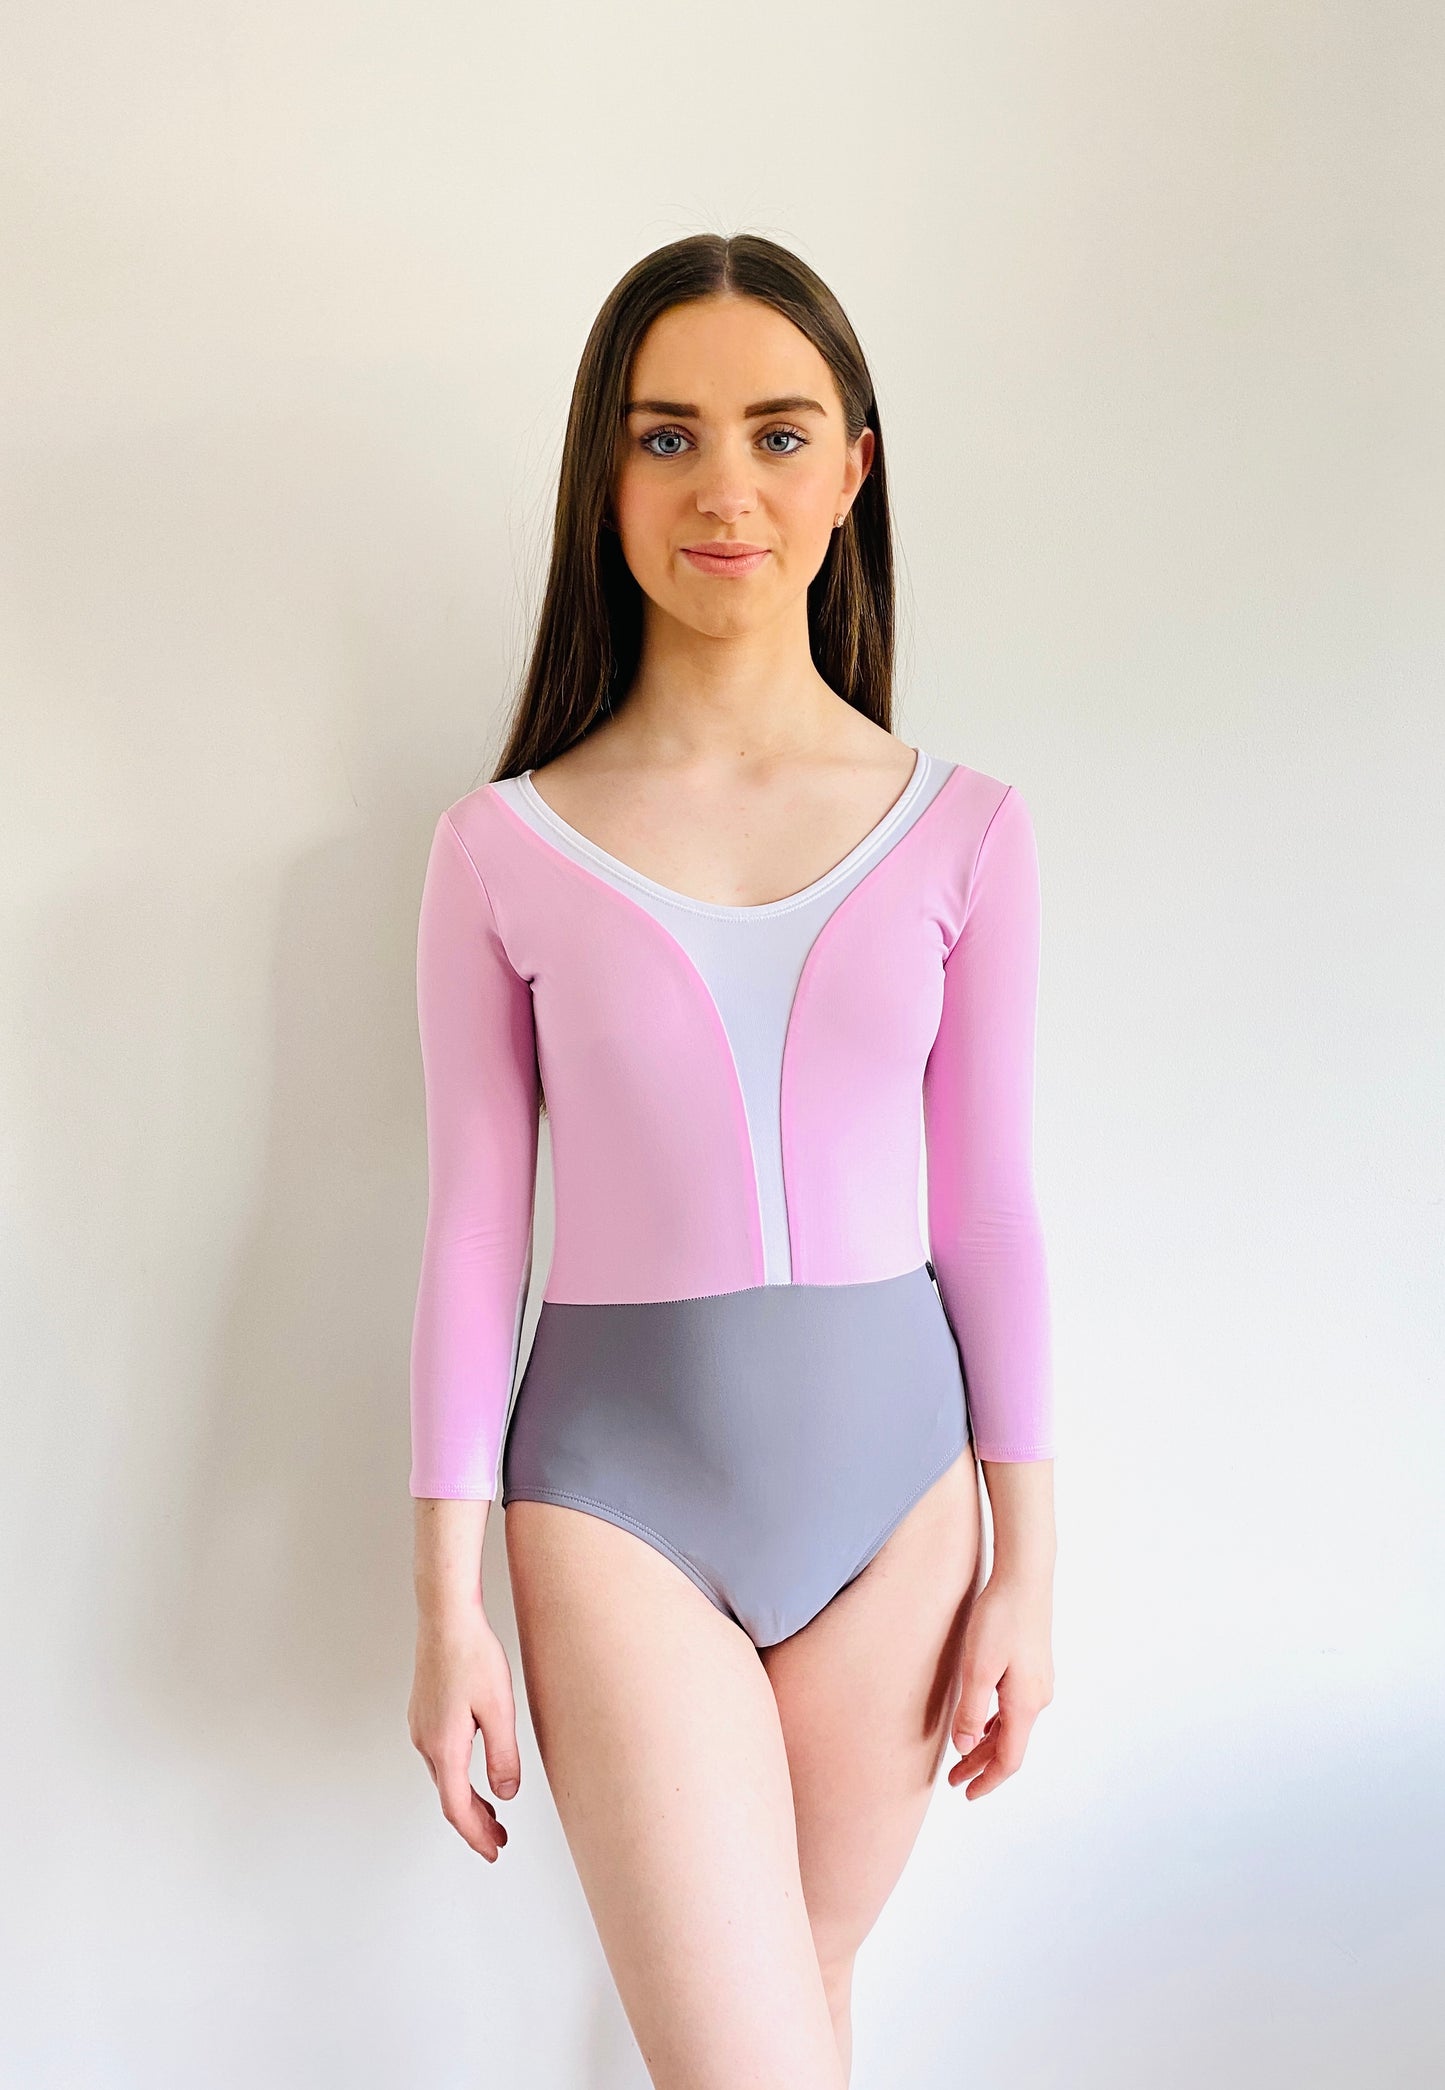 Sole Dancewear Passione - Long Sleeve Ballet Dance Leotard -Pink and Cloud from The Collective Dancewear